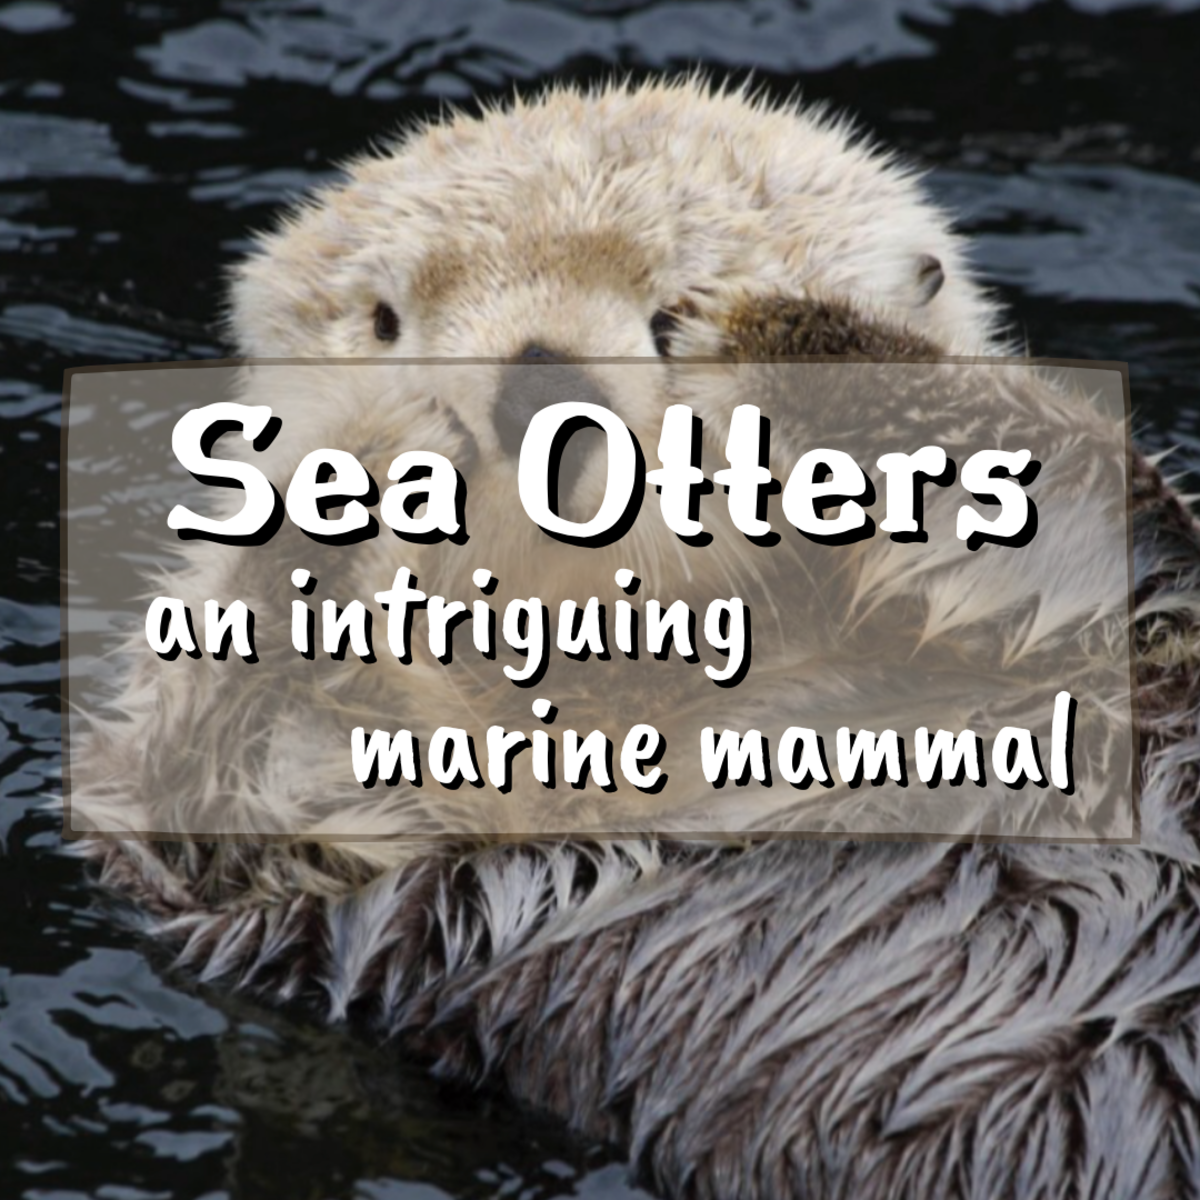 Read on to learn facts and info about sea otters, a truly intriguing marine mammal. The photo above shows a Russian Sea Otter rubbing its face.